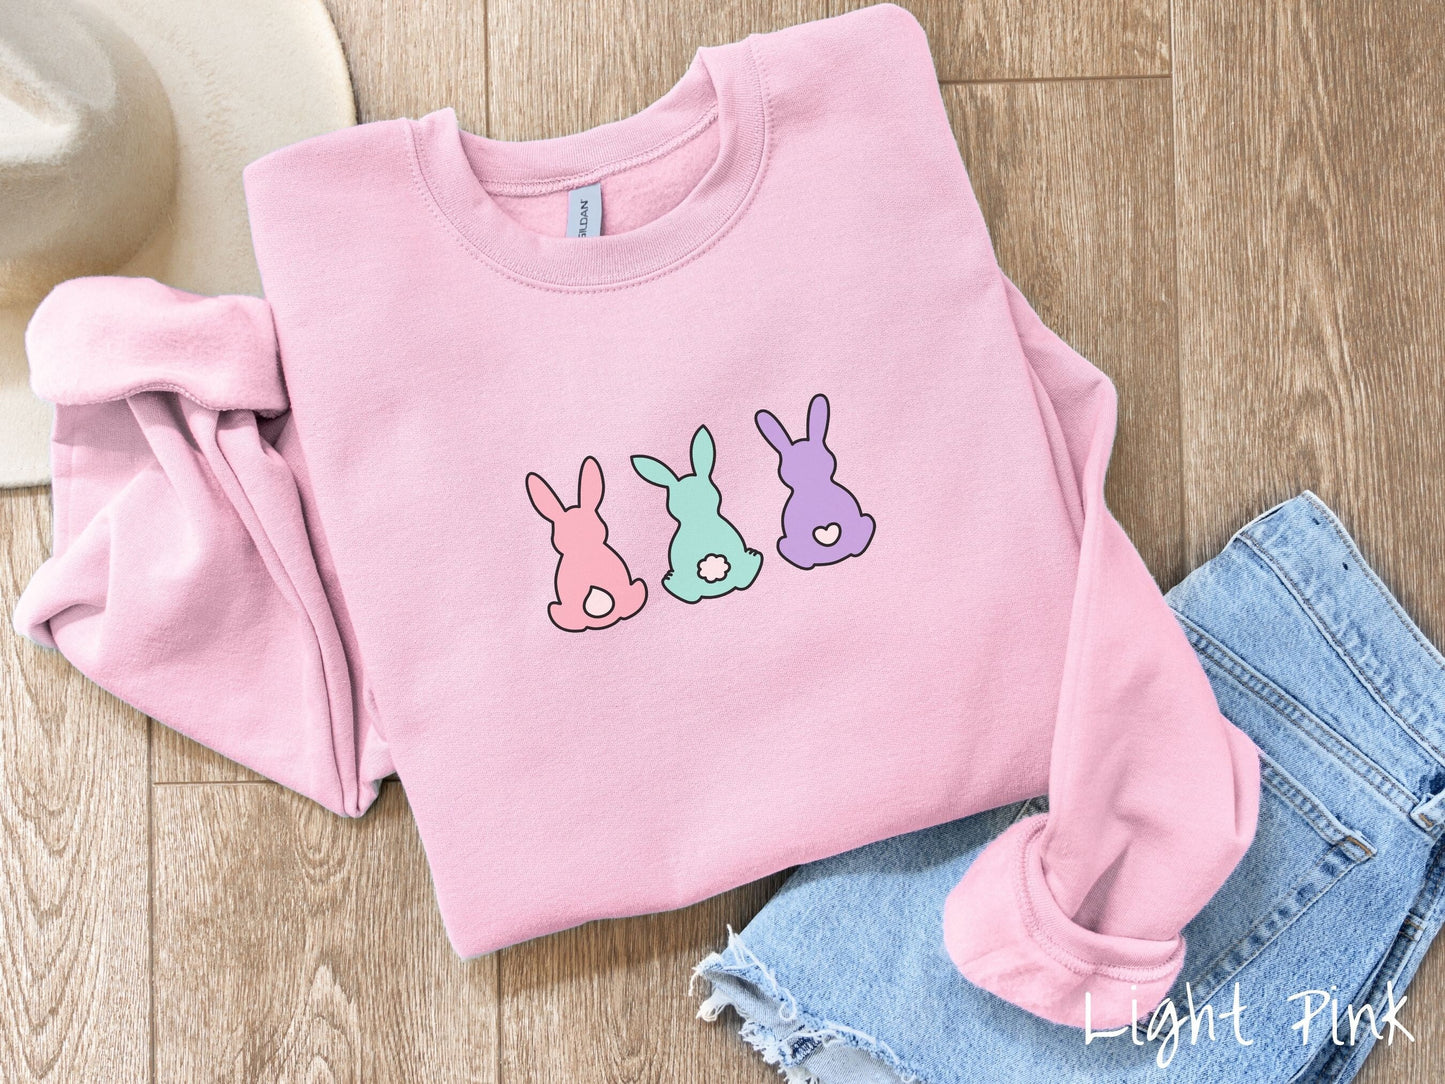 A cute, vintage light pink colored shirt with three colorful bunny rabbits sitting facing away. One is pink with a white tail, another bay with white tail, and the third is purple with a white, heart-shaped tail.